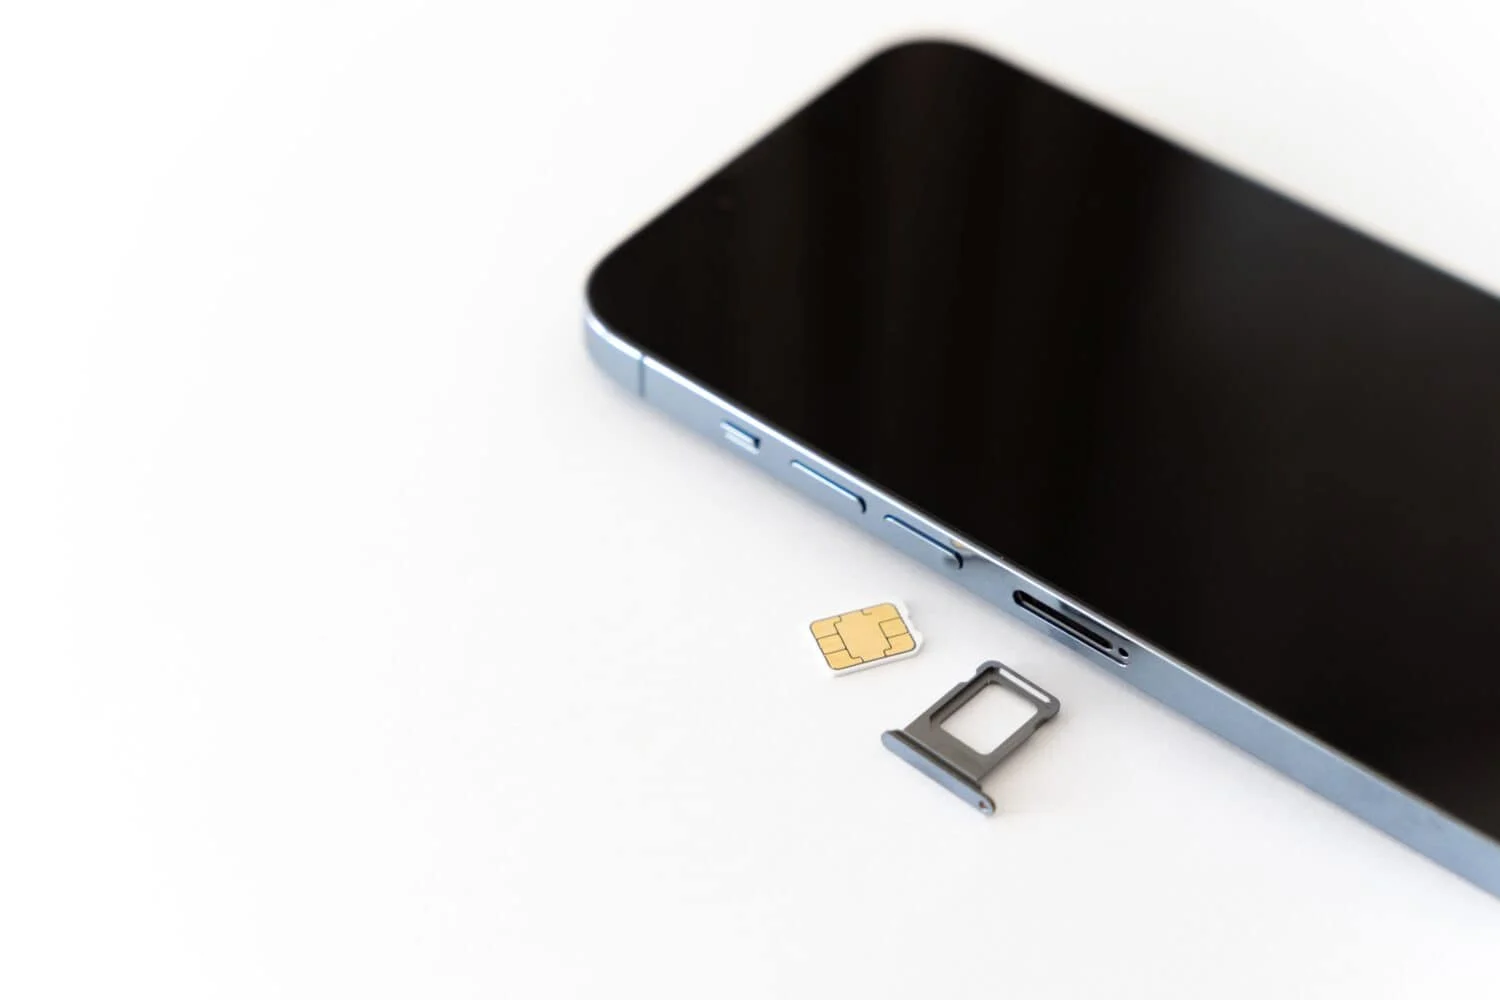 Identifying The SIM Card Slot On IPhone 7